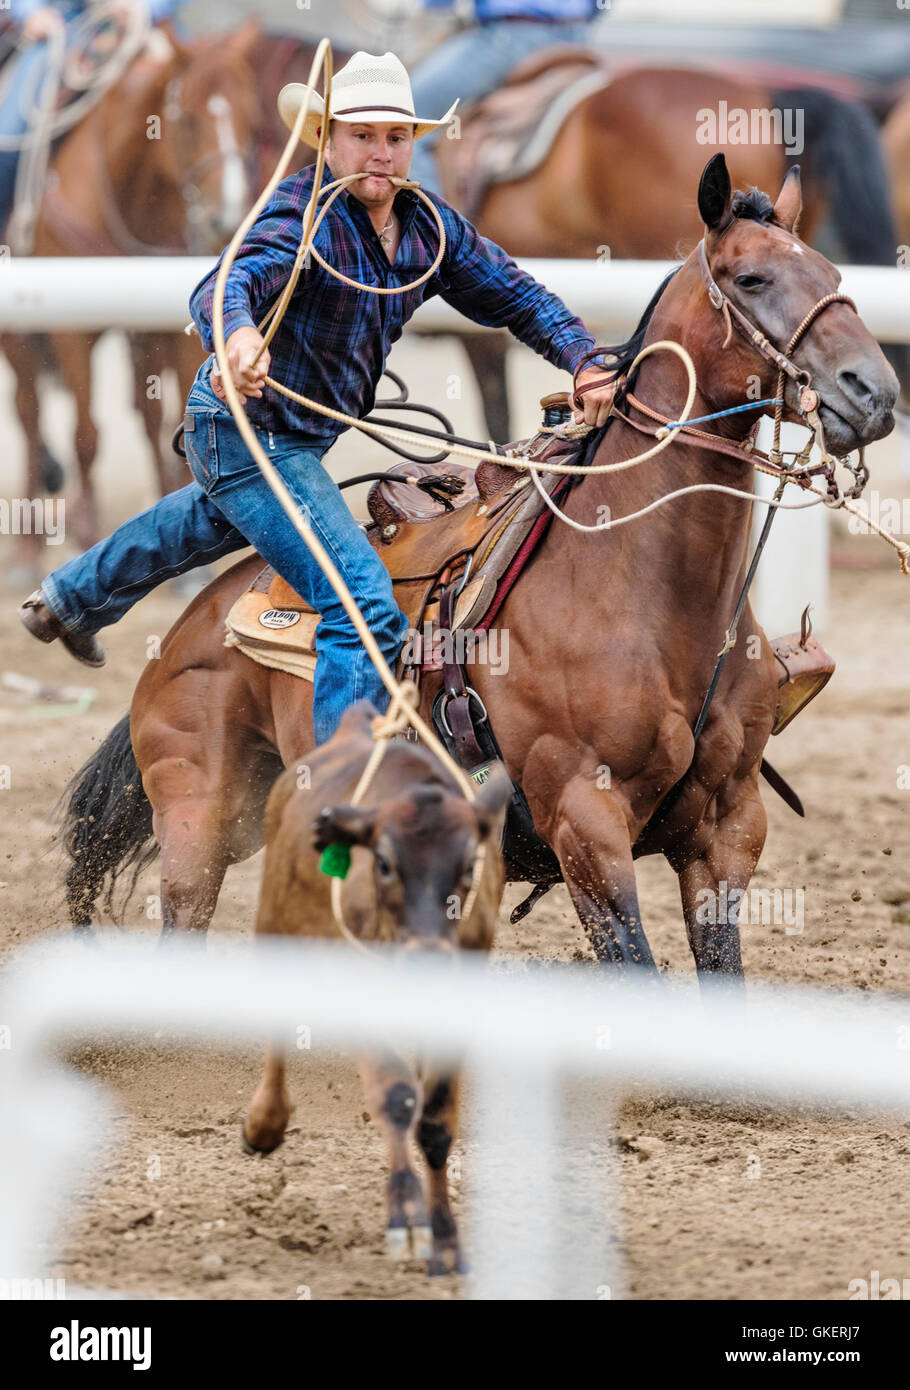 Rodeo cowboy on horseback competing in calf roping, or tie-down roping event, Chaffee County Fair & Rodeo, Salida, Colorado, USA Stock Photo